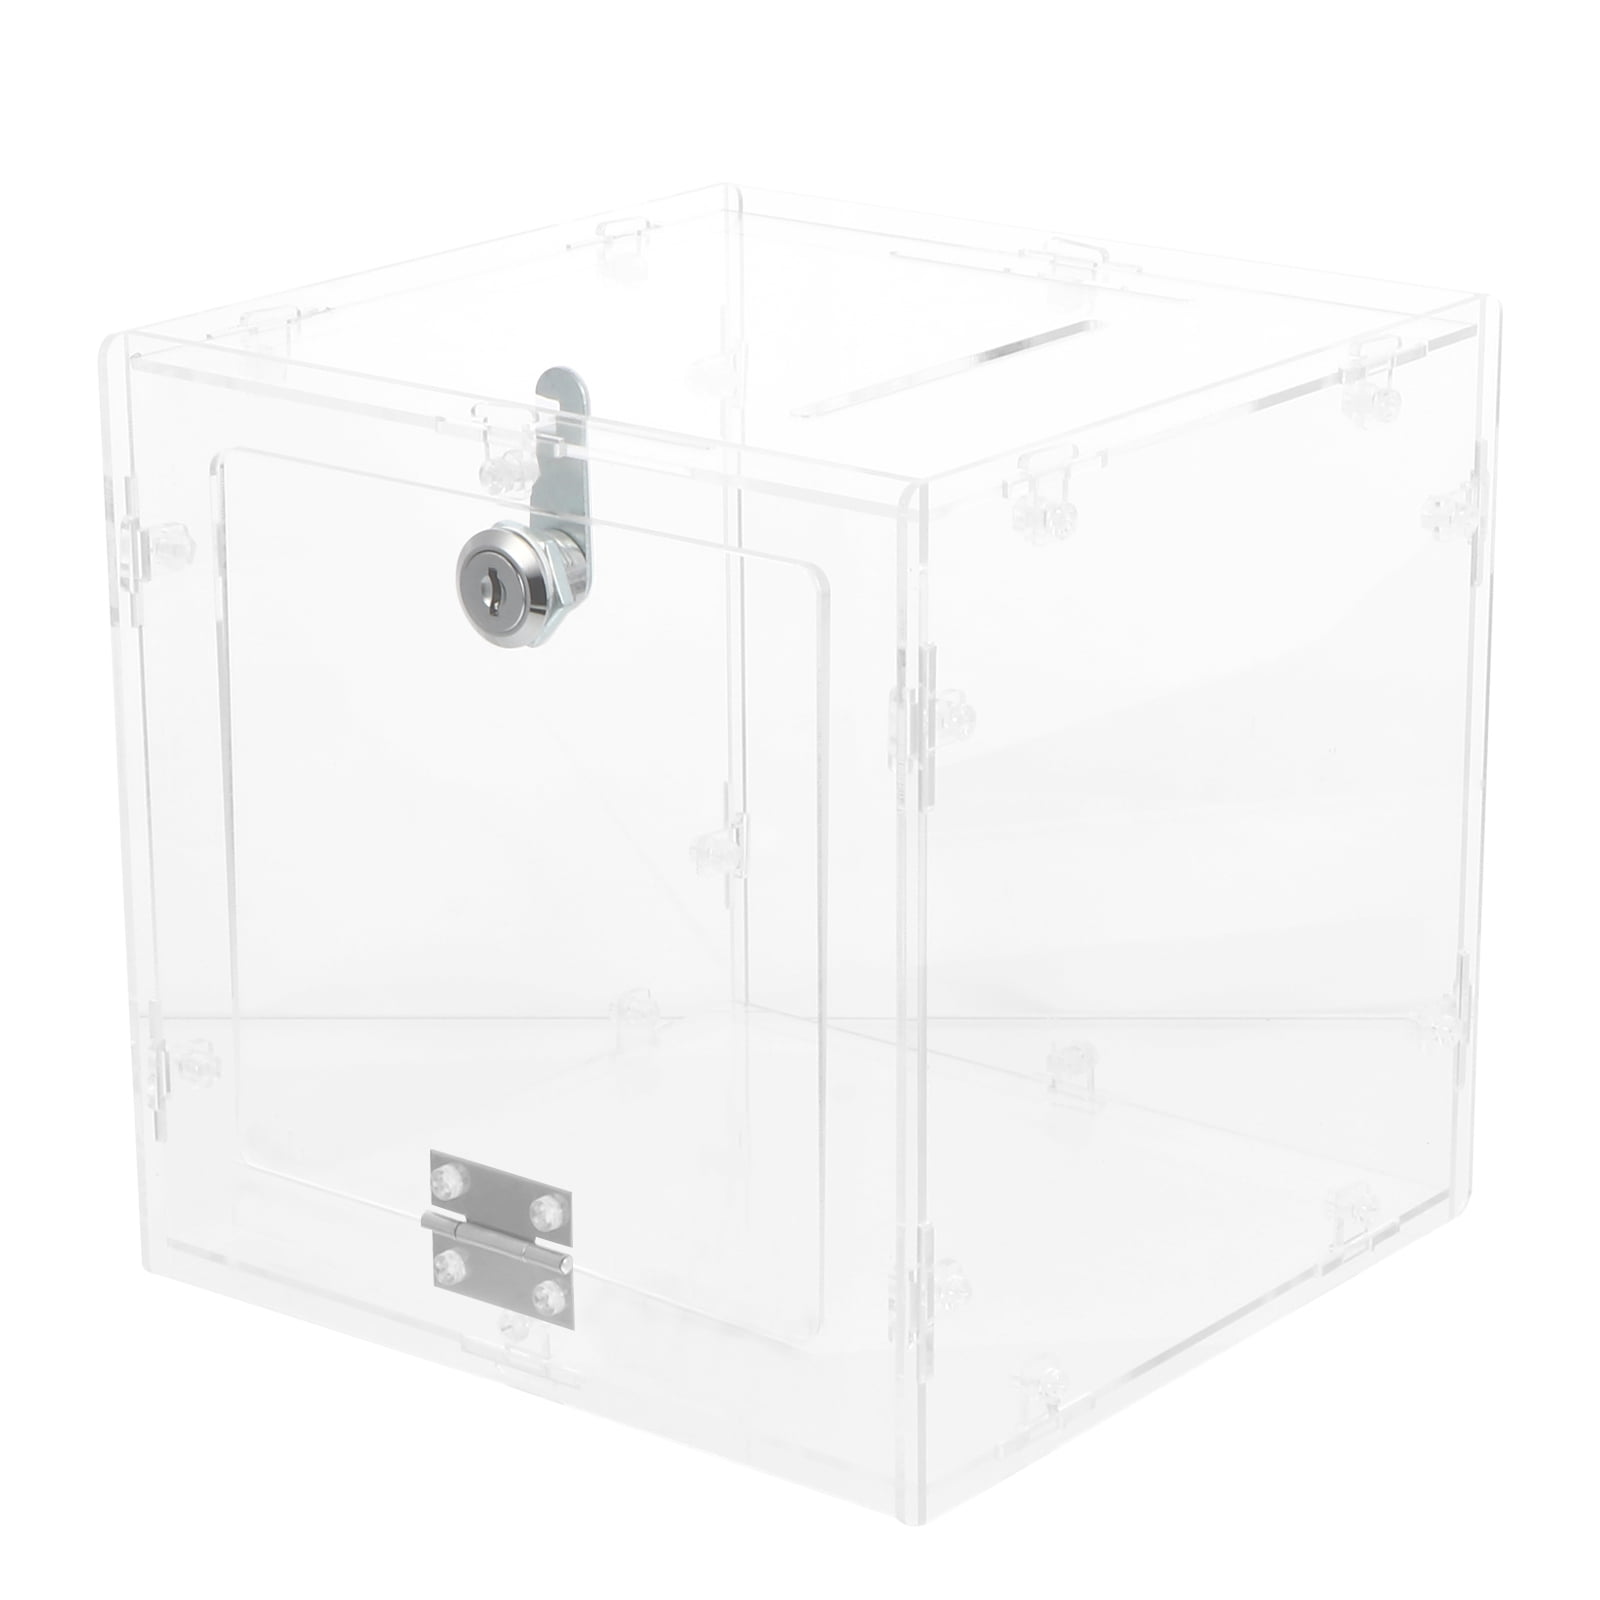 Tip Container Ballot Box with Pad Lock MCB Acrylic Box Small House Shape Coin Collection Box 